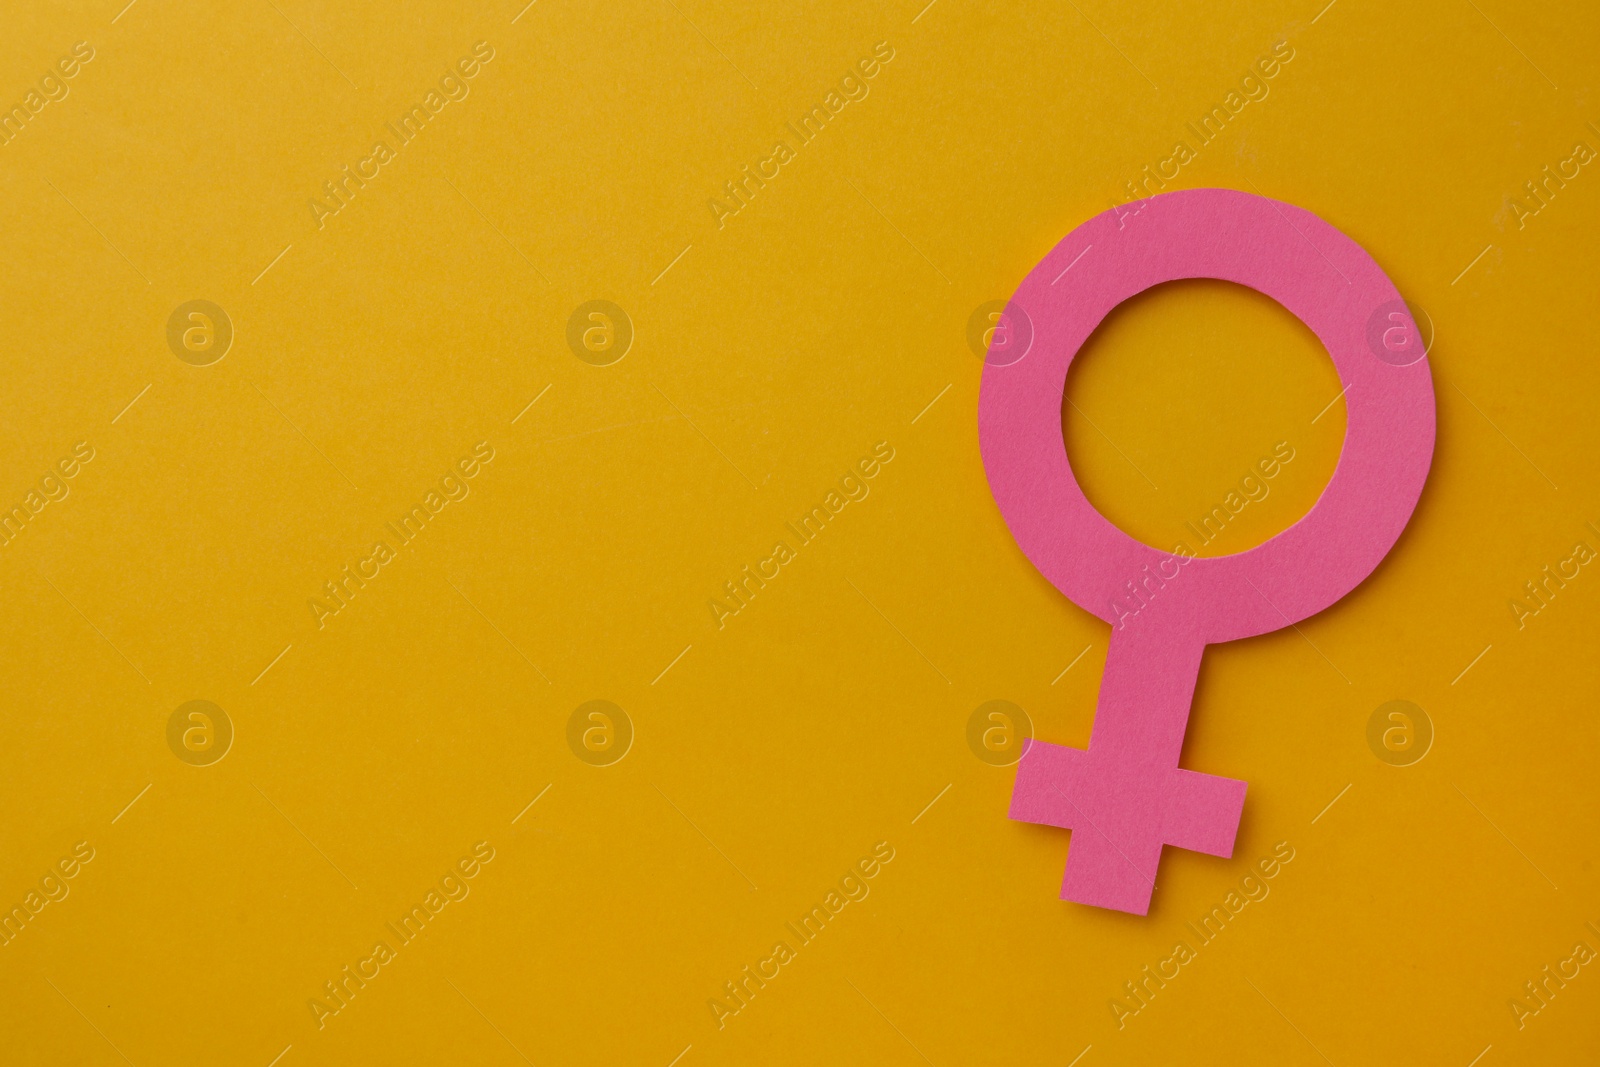 Photo of Female gender sign and space for text on orange background, top view. Women's health concept